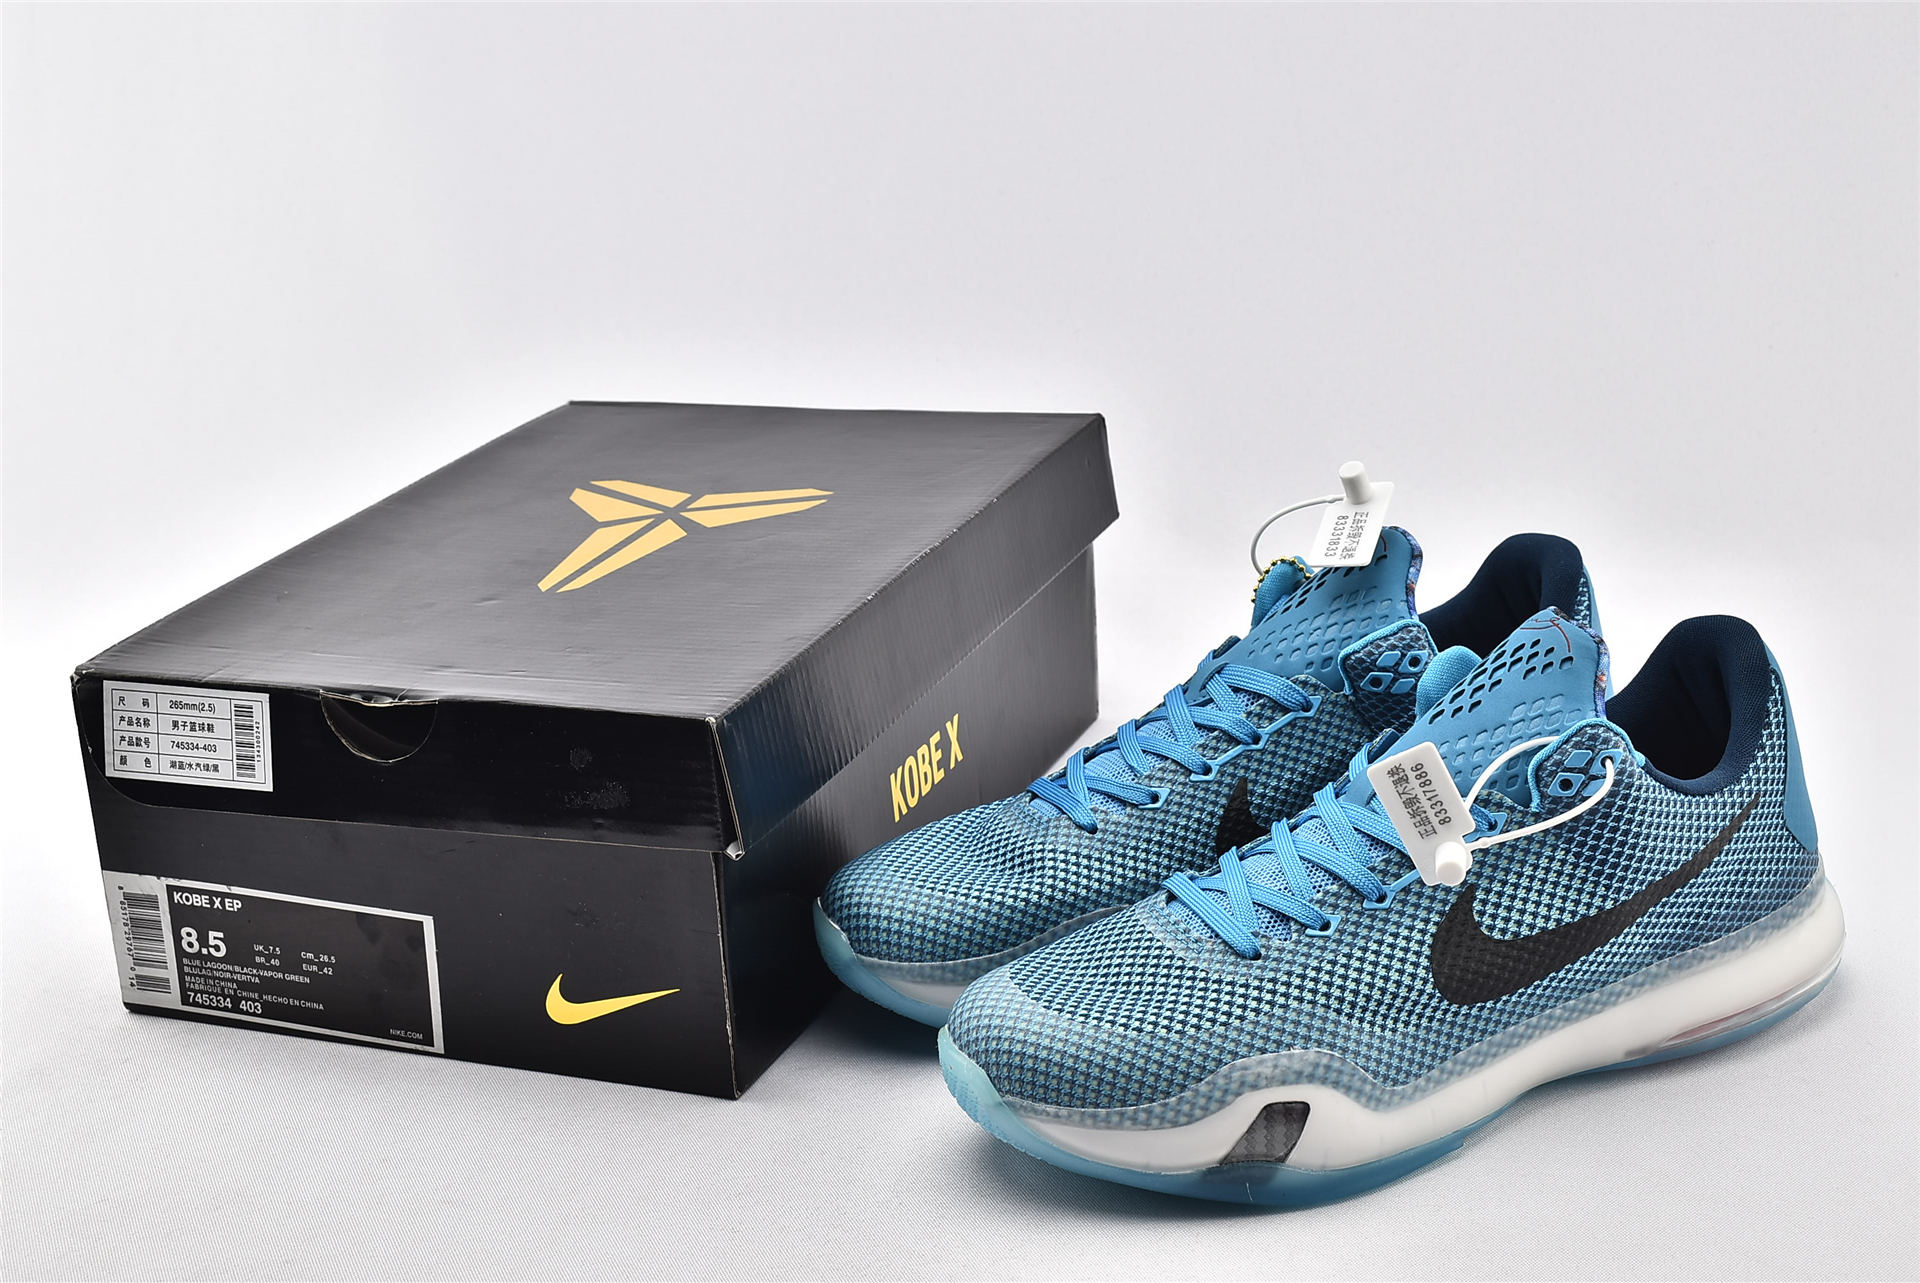 kobe x shoes for sale